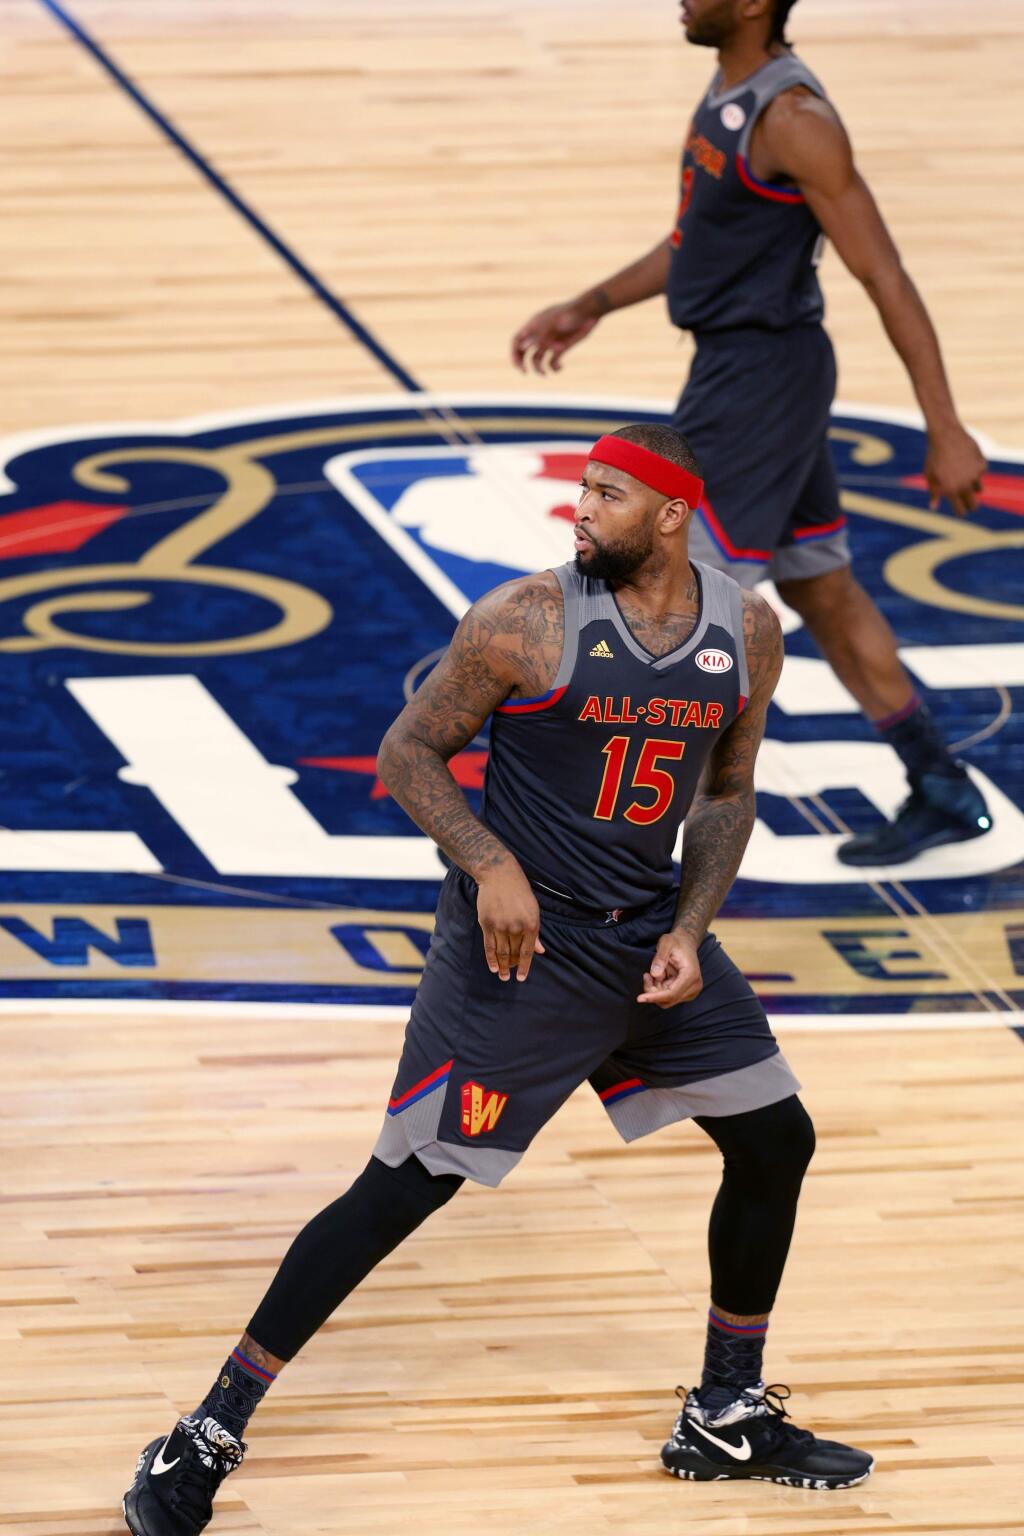 Western Conference forward DeMarcus Cousins of the Sacramento Kings (15) plays during the first half of the NBA All-Star basketball game in New Orleans, Sunday, Feb. 19, 2017. The New Orleans Pelicans agreed to acquire Cousins from the Kings on Sunday, the same night the center was playing in the All-Star Game in their arena. (AP Photo/Max Becherer)